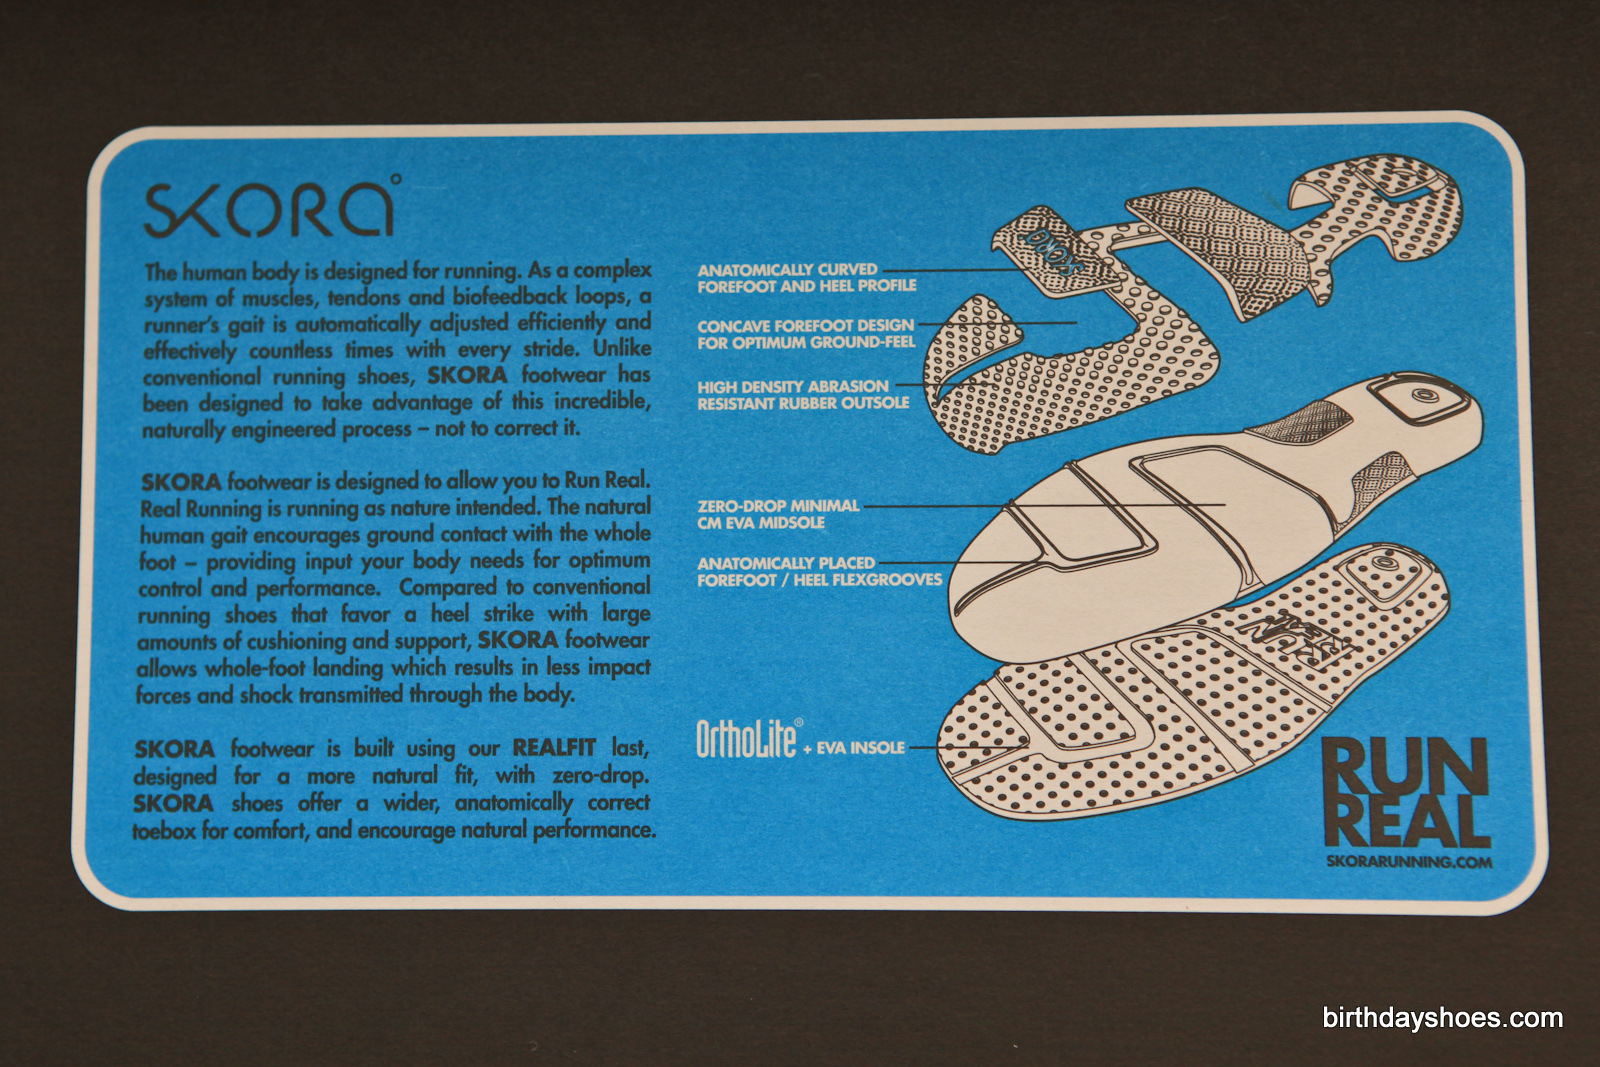 The Skora shoes come with a bit of product info inside the box.